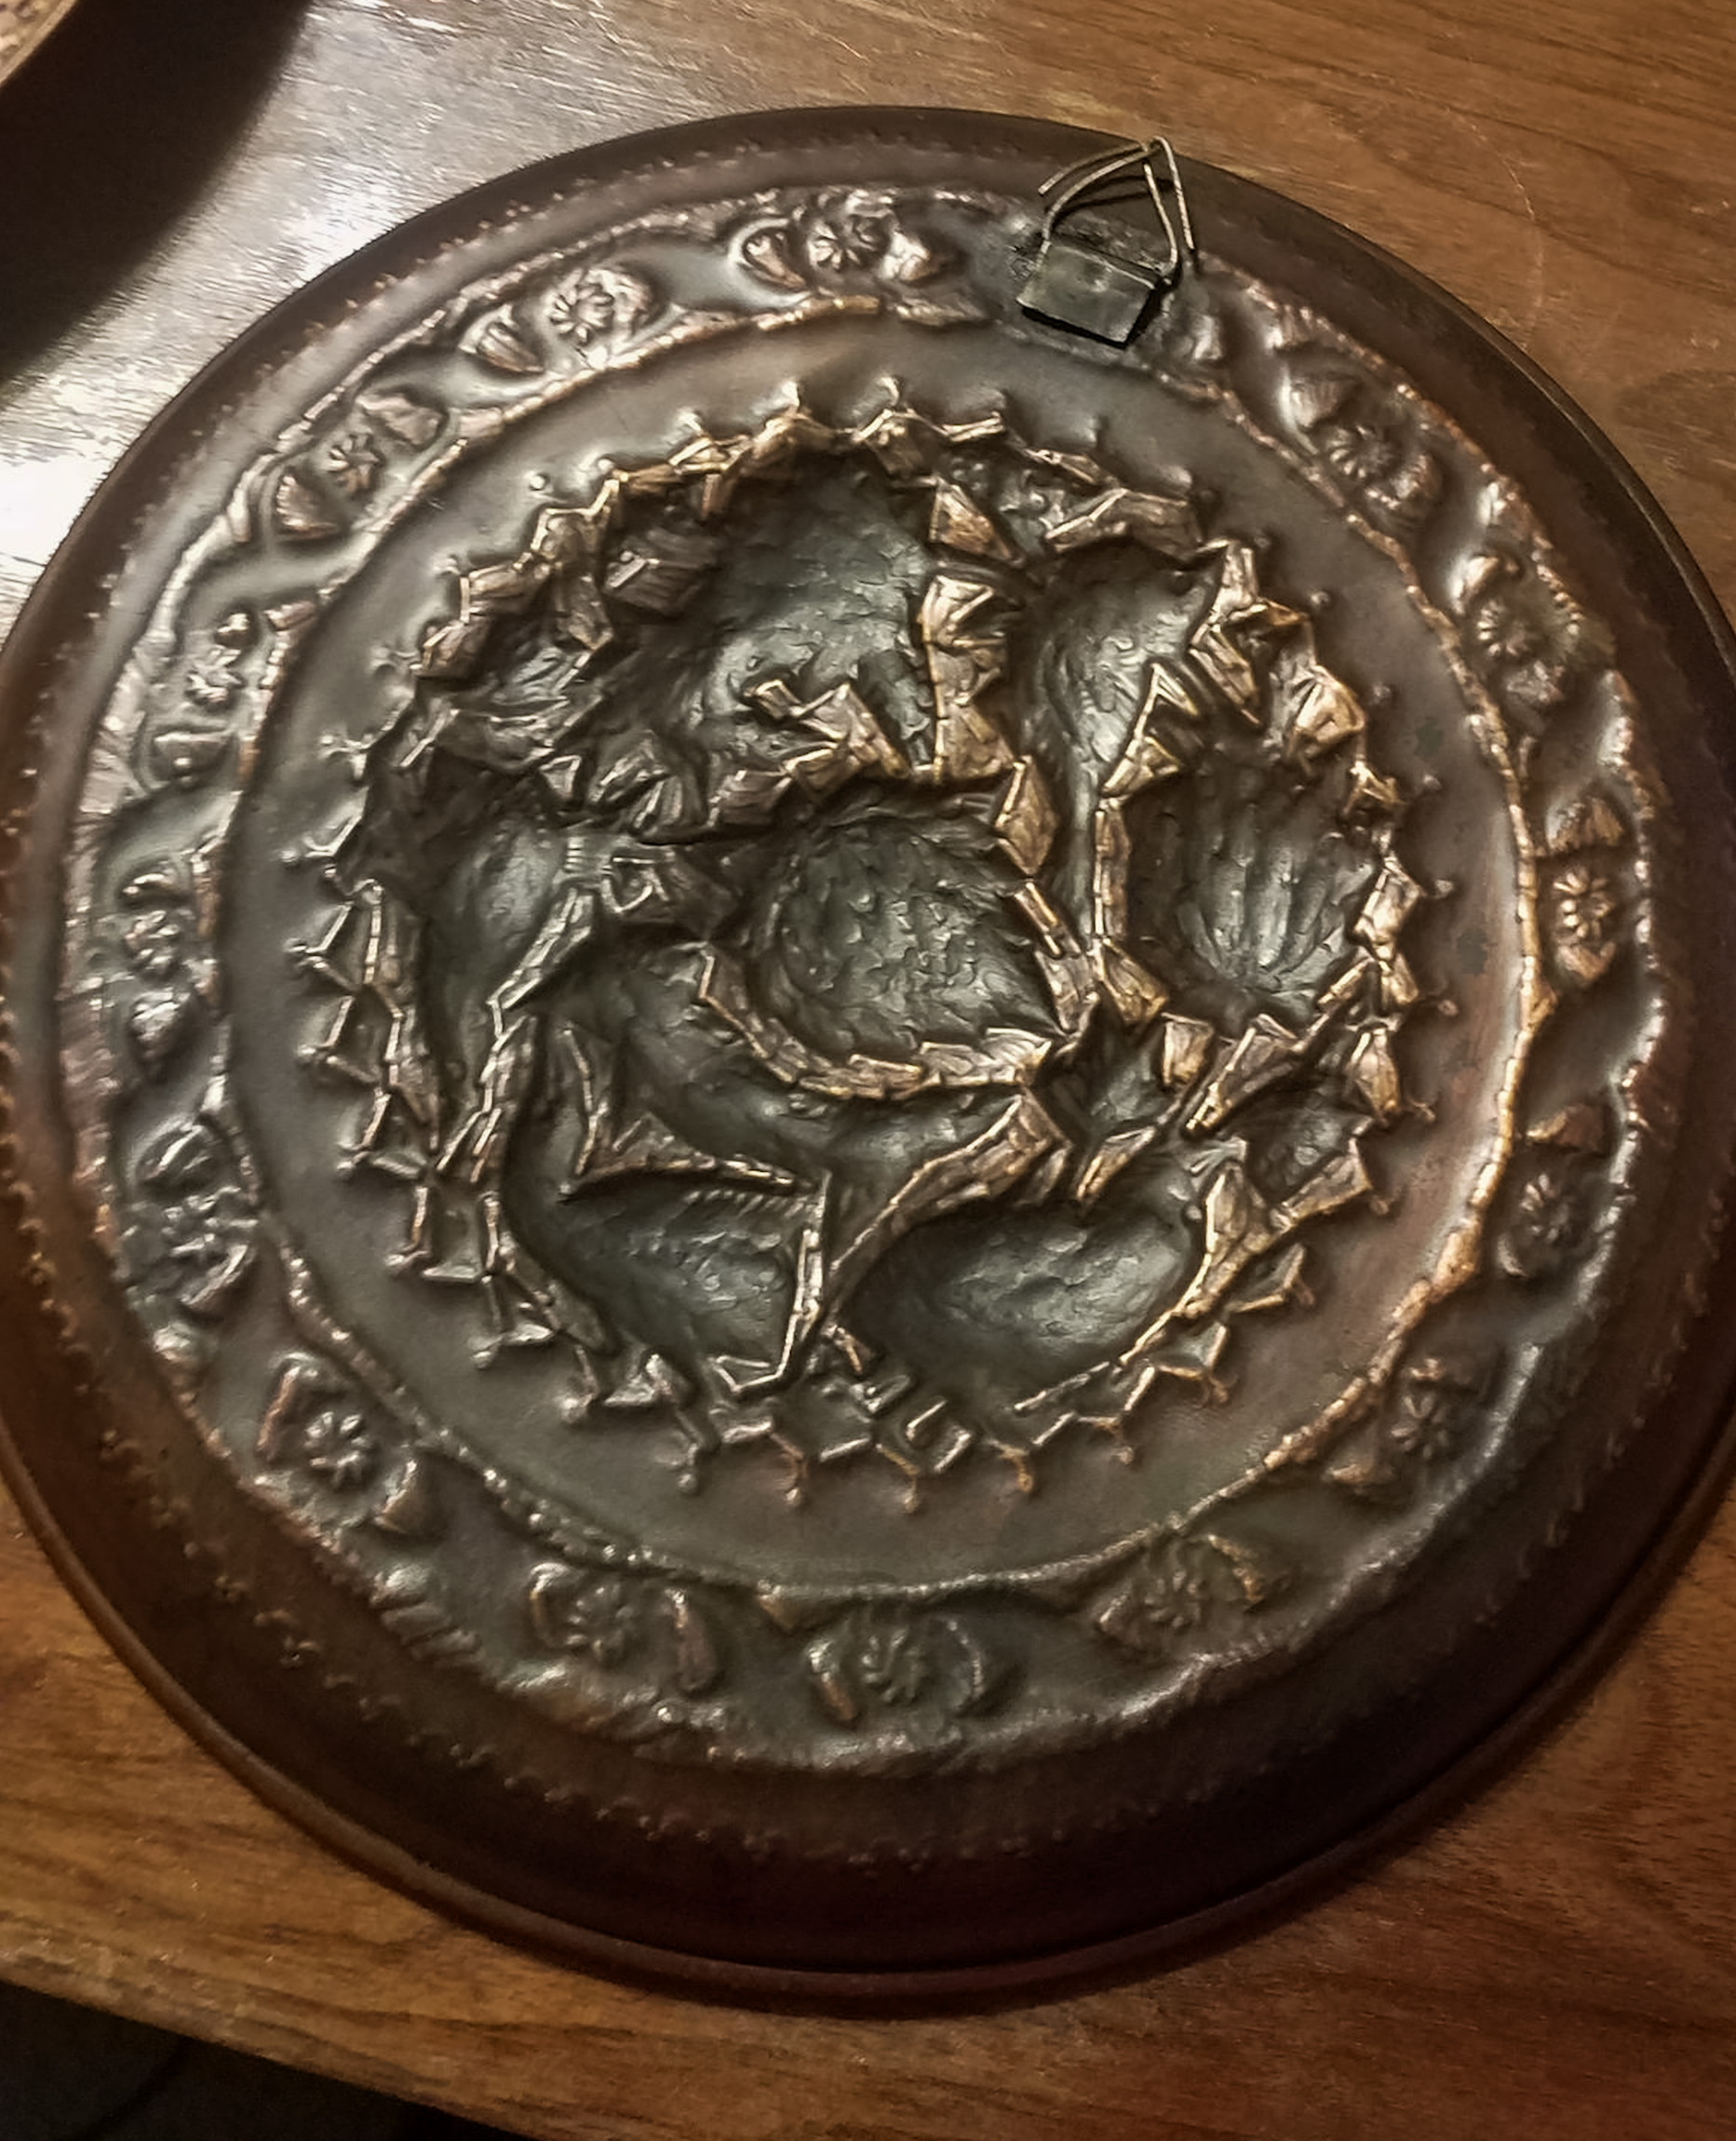 Copper Plate with Islamic Persian Decorative Repousse